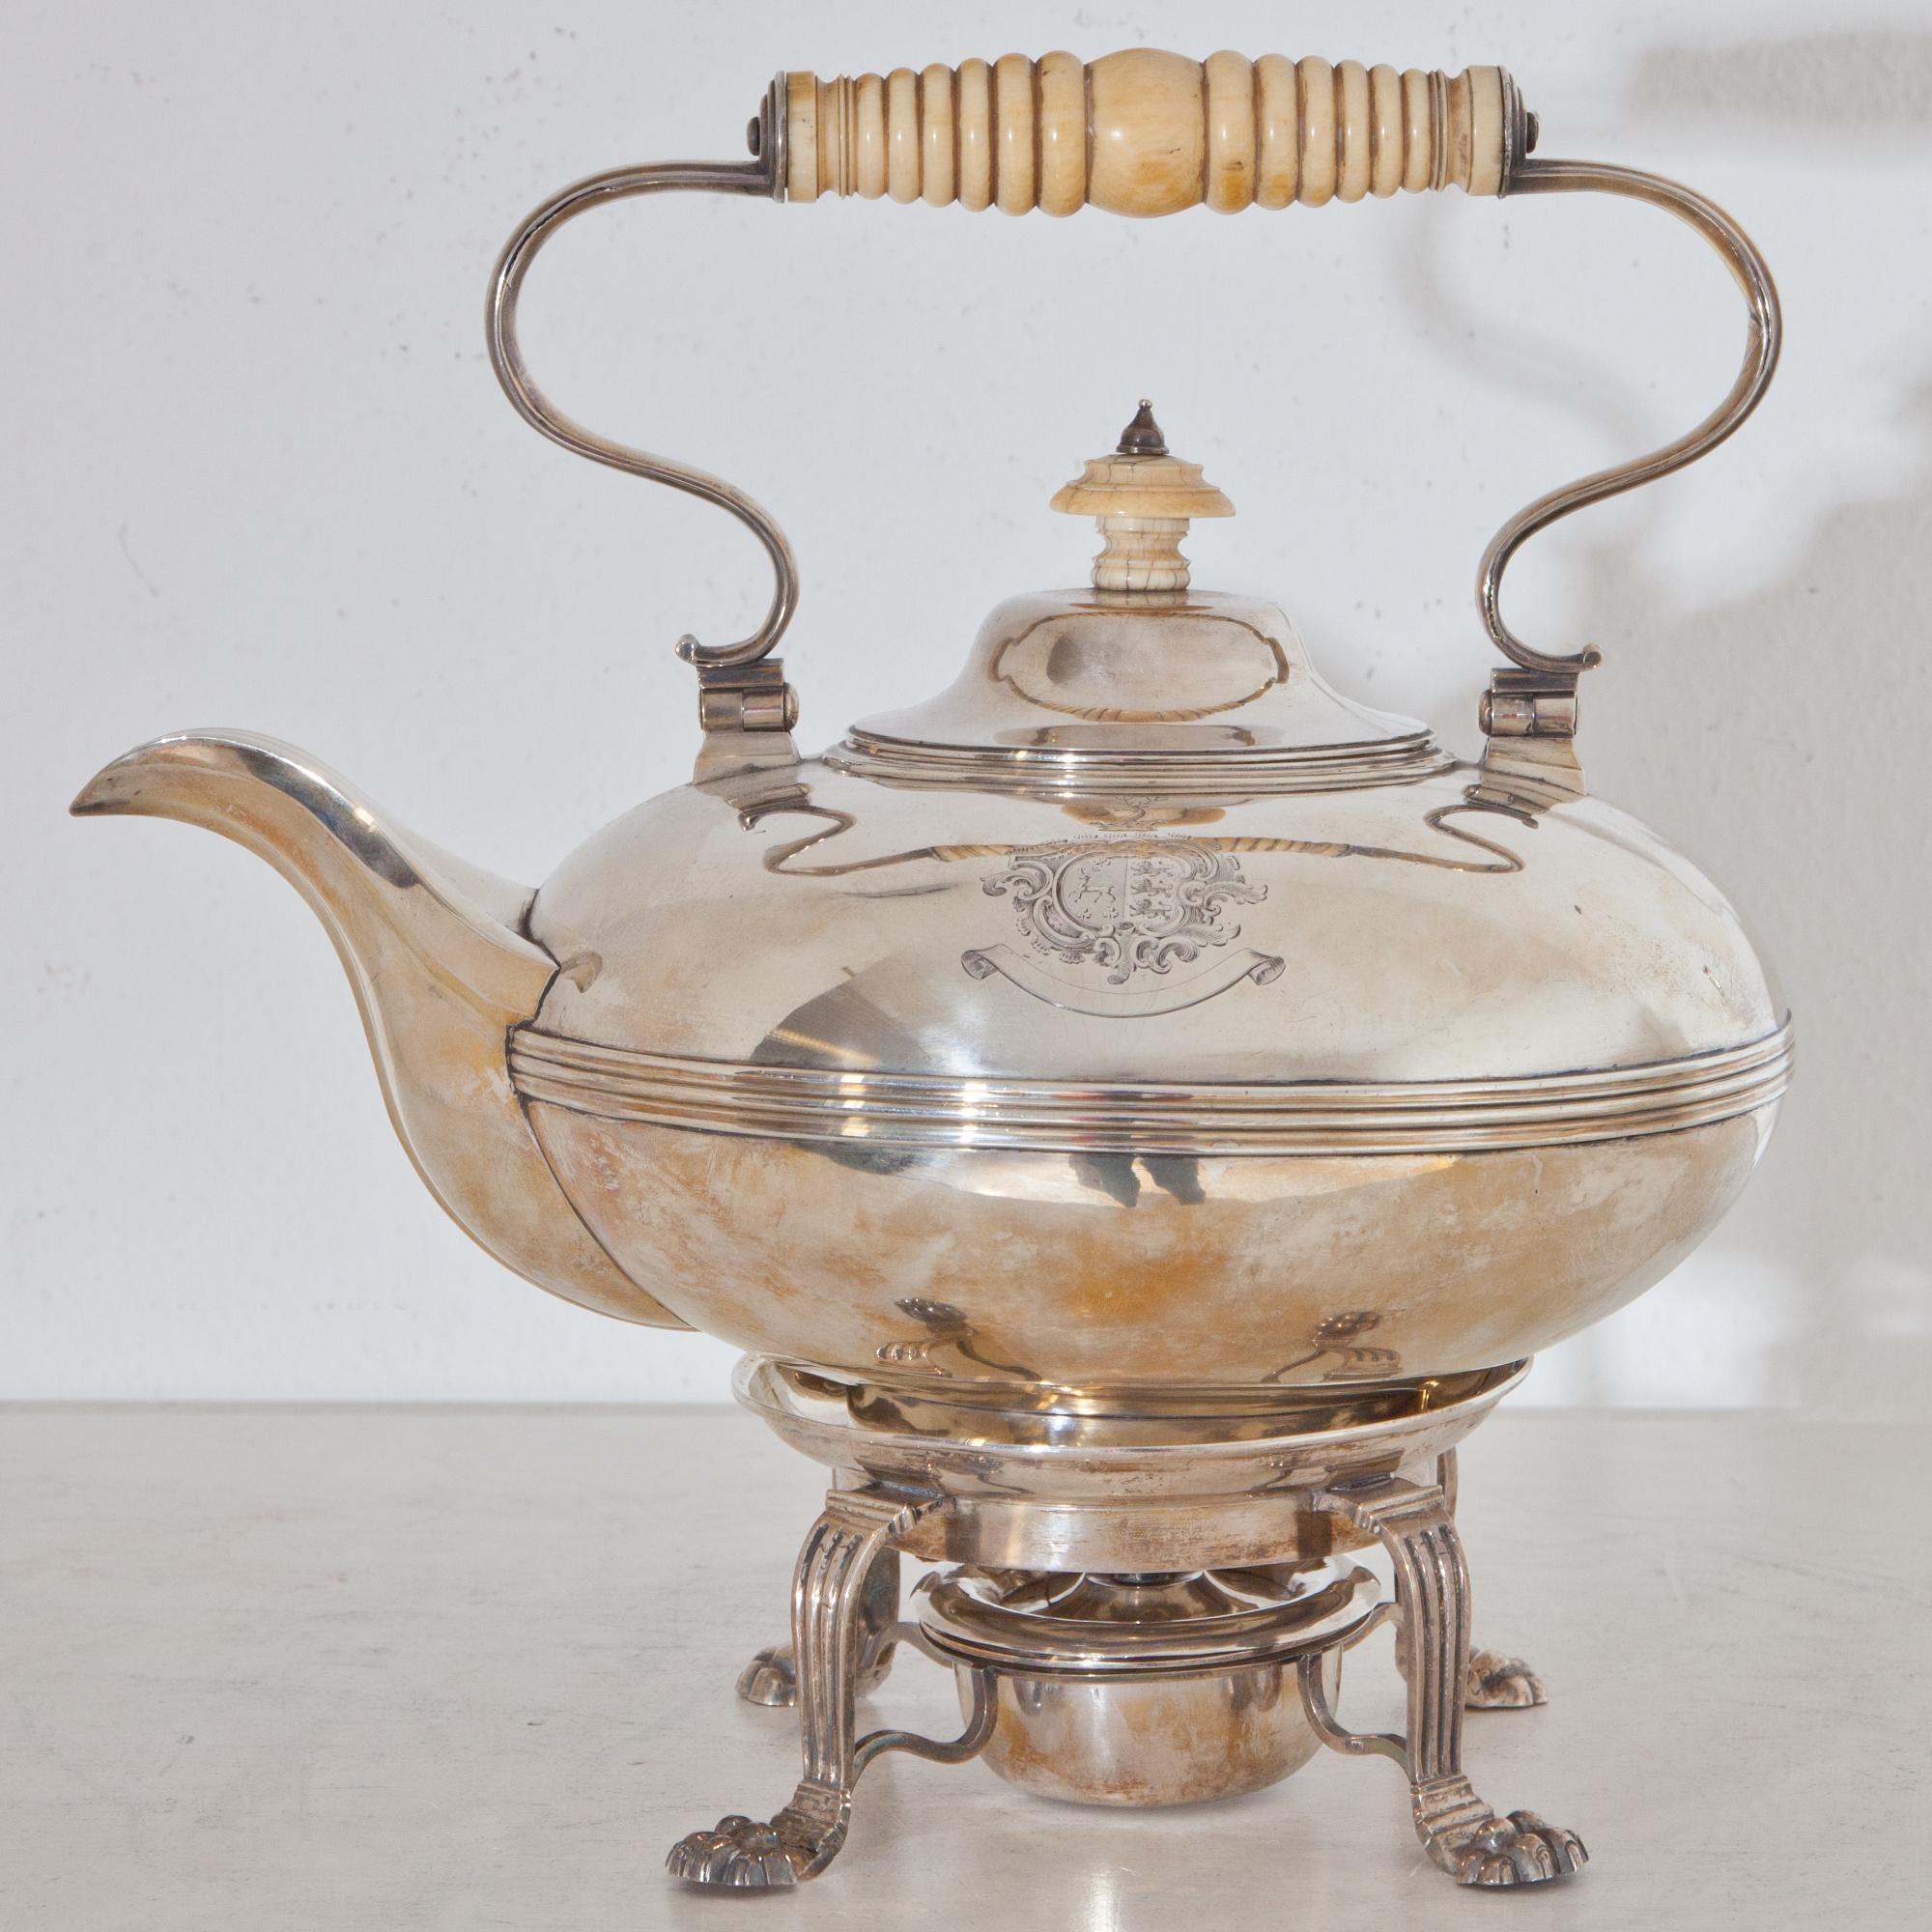 Irish teapot made of sterling silver by William Nolan, marked Dublin 1828-29 and a warmer on lion paw feet. Engraved coat of arms on the wall of the O'Connell family (stag between three trefoils) impaling Carew family (three lions), possibly at the